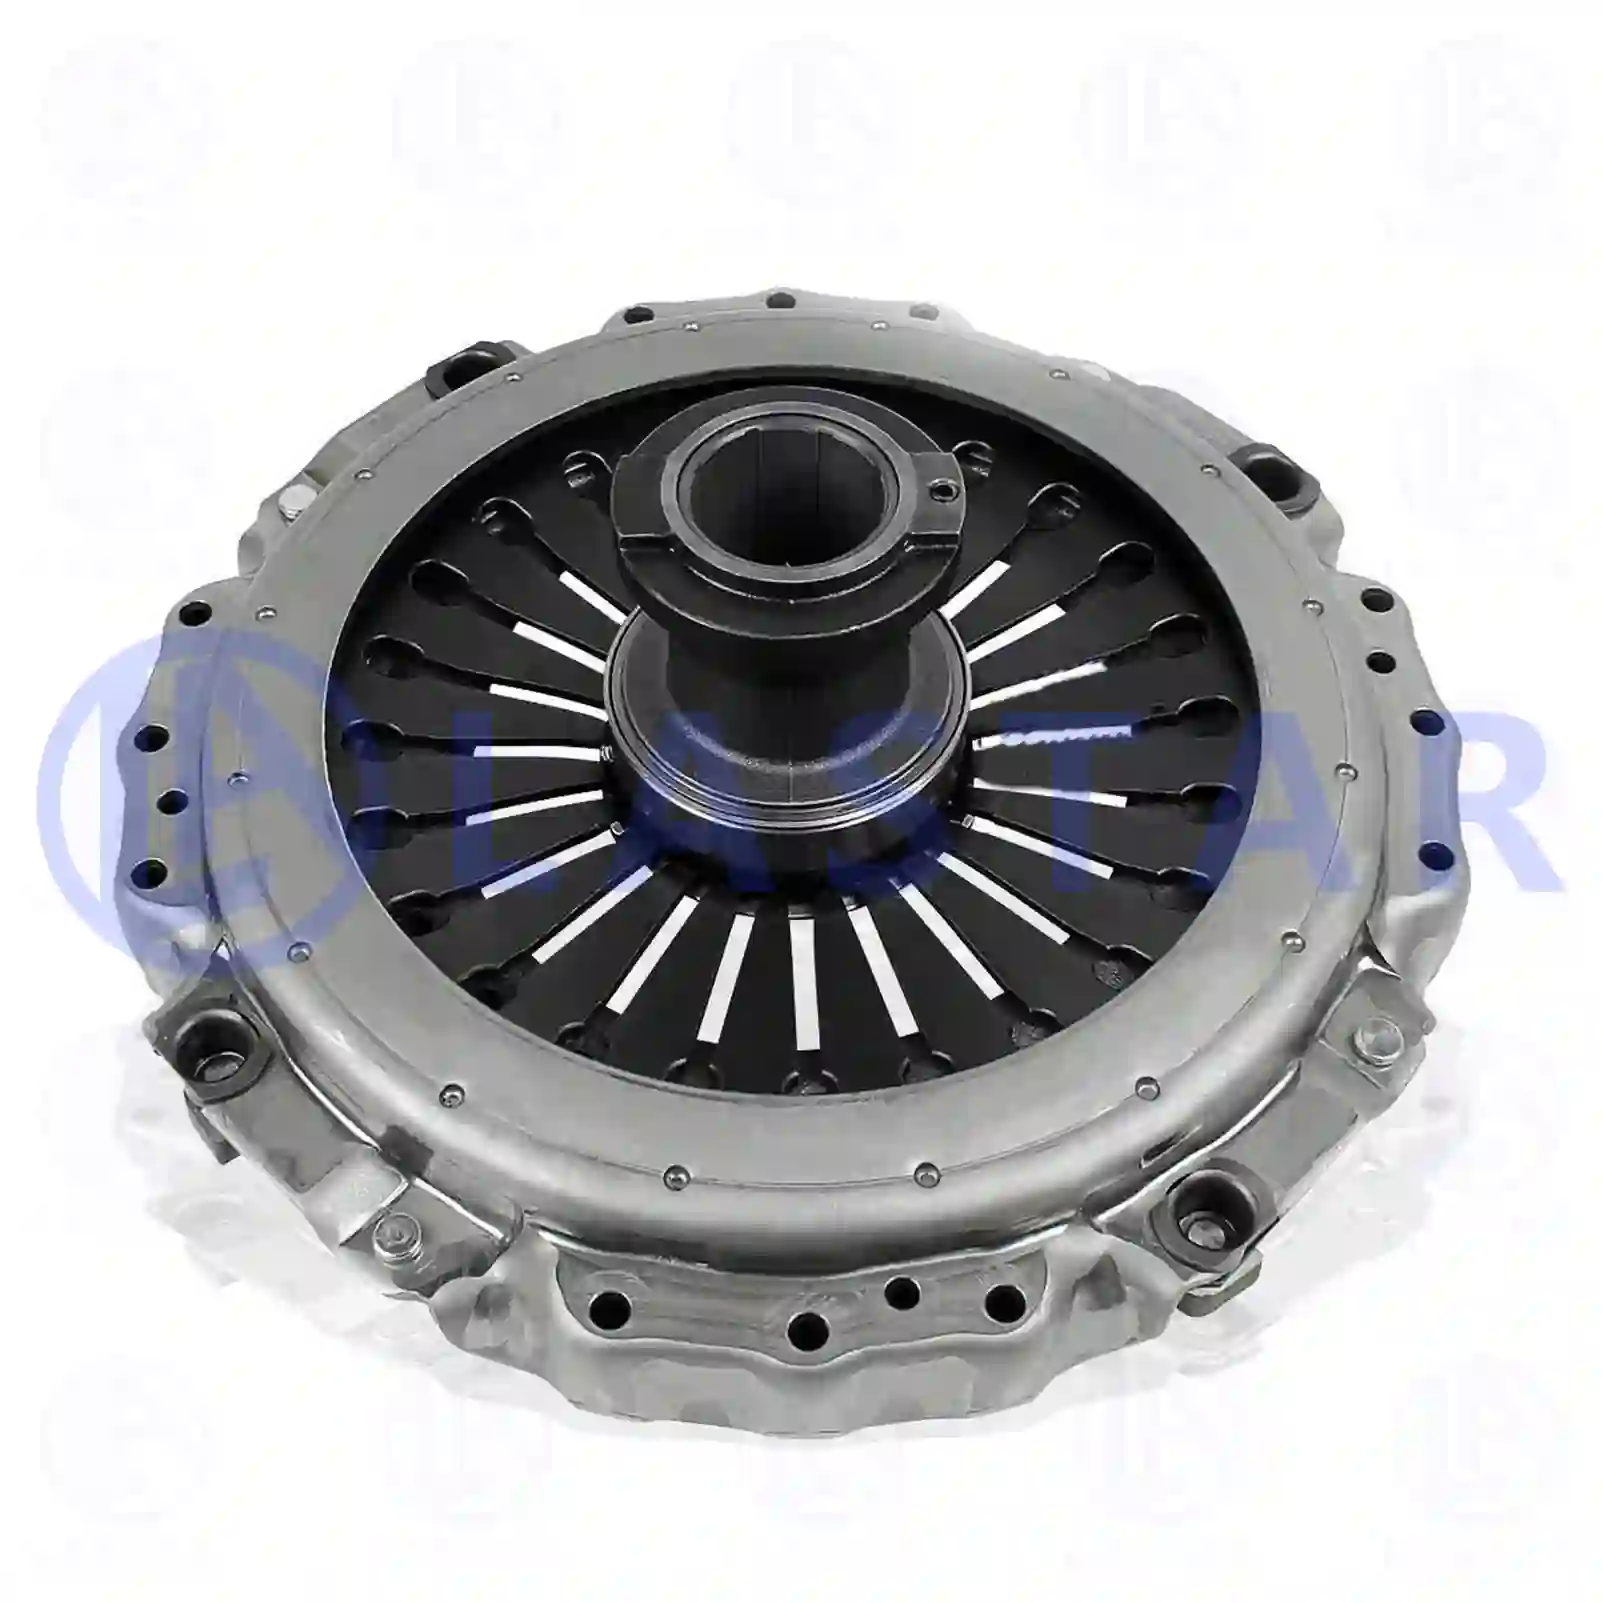  Clutch Kit (Cover & Disc) Clutch cover, with release bearing, la no: 77722426 ,  oem no:0052506404, 005250640480, 0052506604, 005250660480, 0052509304, 005250930480, 0052509404, 005250940480, 0072506104, 007250610480, 0072506504, 0072507904, 0072508104, 0072509704, 0082502404, 0082503004, 0082503104, 0082504404, 0092500704, 0092500804, 0092508304, 0102500704, 0102500804, 0102501004, 0212504001, 0212504101, 0222502001, 0222505501, 0242500101, 0242500201, 0242500401, 0242507401, 0262504701, 0262506601, 442999513000 Lastar Spare Part | Truck Spare Parts, Auotomotive Spare Parts